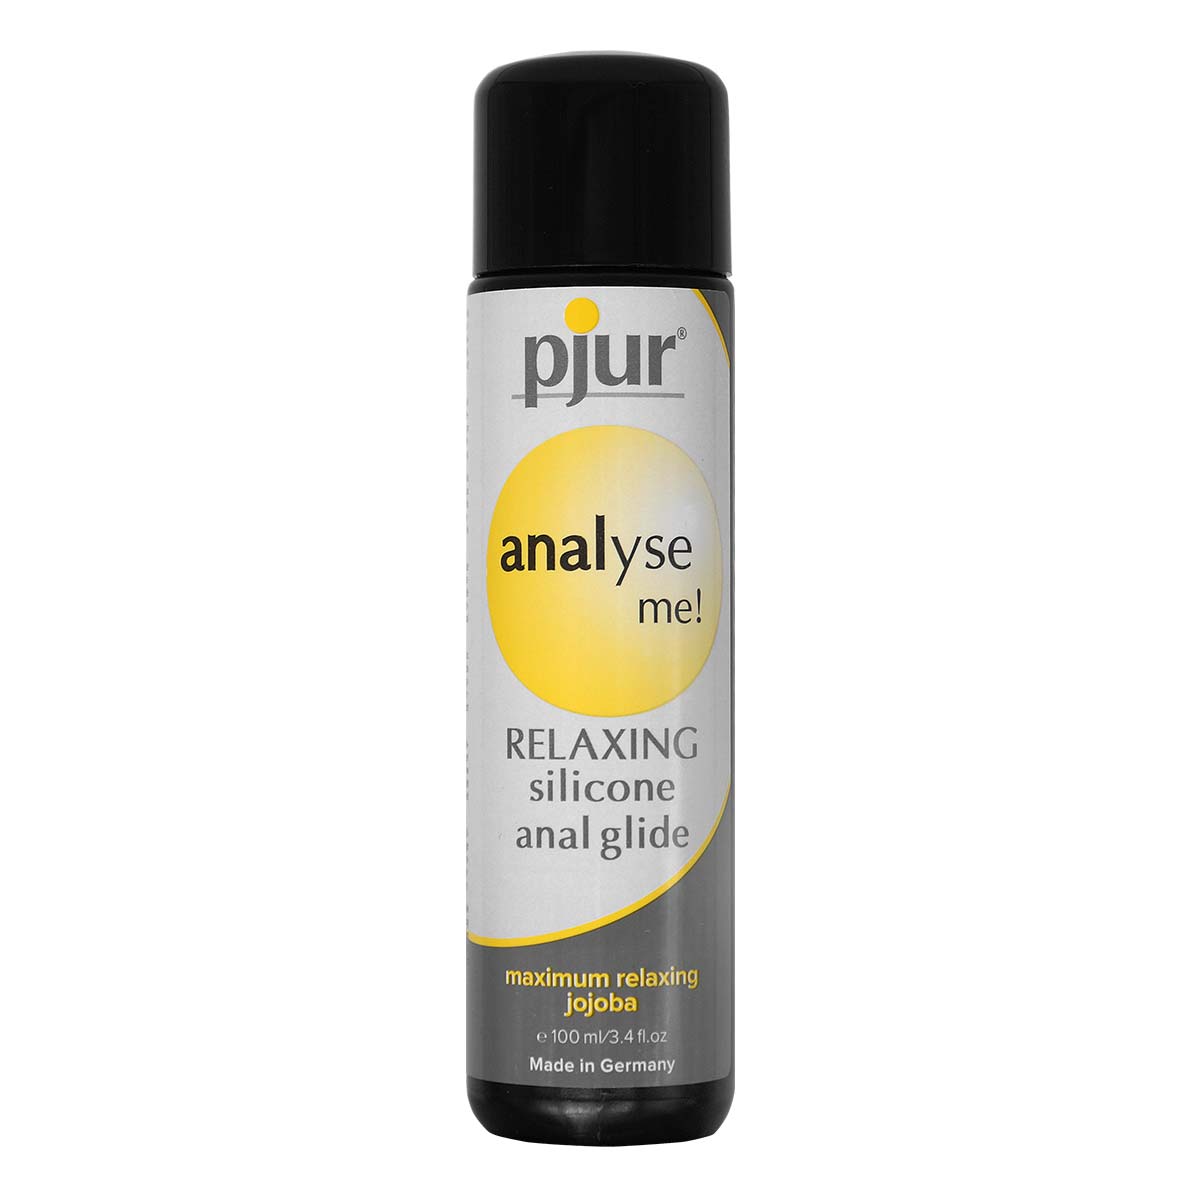 pjur analyse me! RELAXING Silicone Anal Glide 100ml Silicone-based Lubricant (Short Expiry)-thumb_2